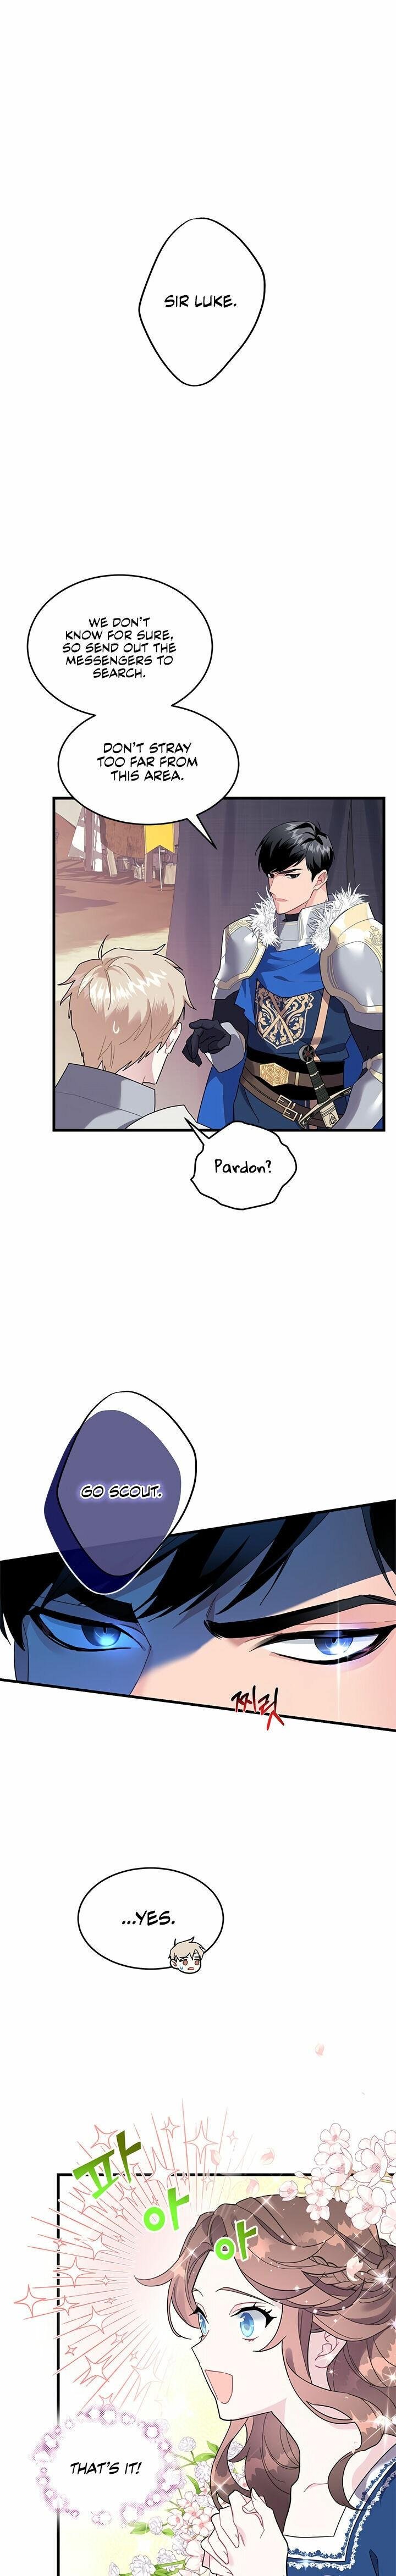 Cavier Falcon Princess Chapter 4 - Page 4